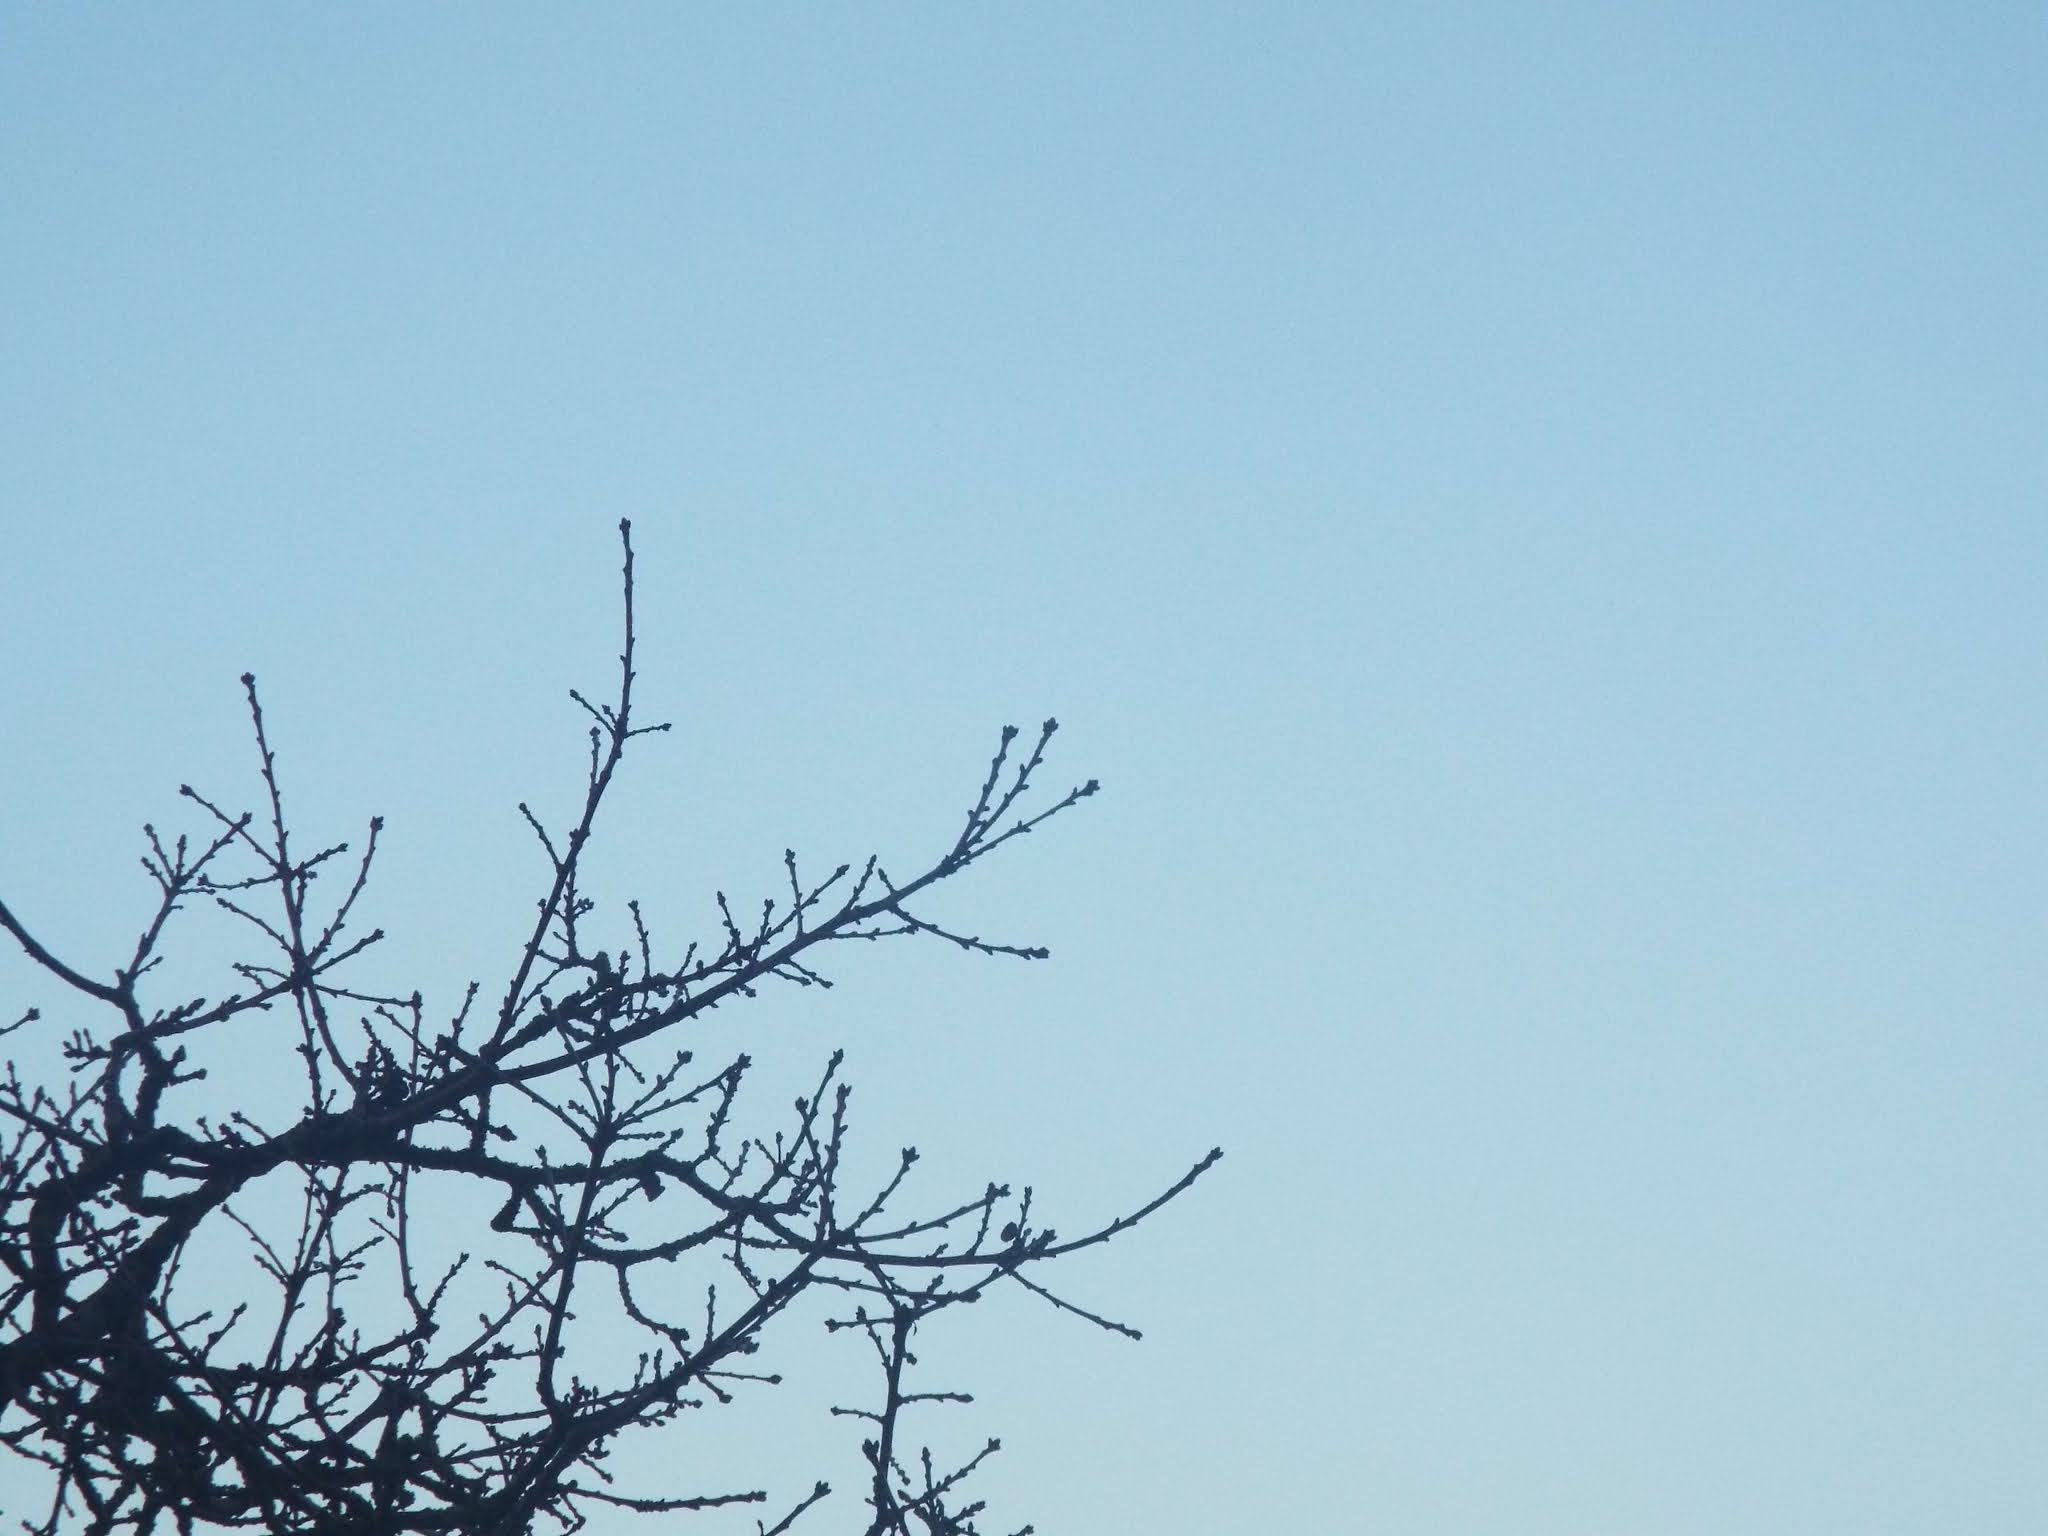 A bare Winter's tree, against a cold blue sky, this New Year's Eve as I share my personal goals and aspirations for the new year.